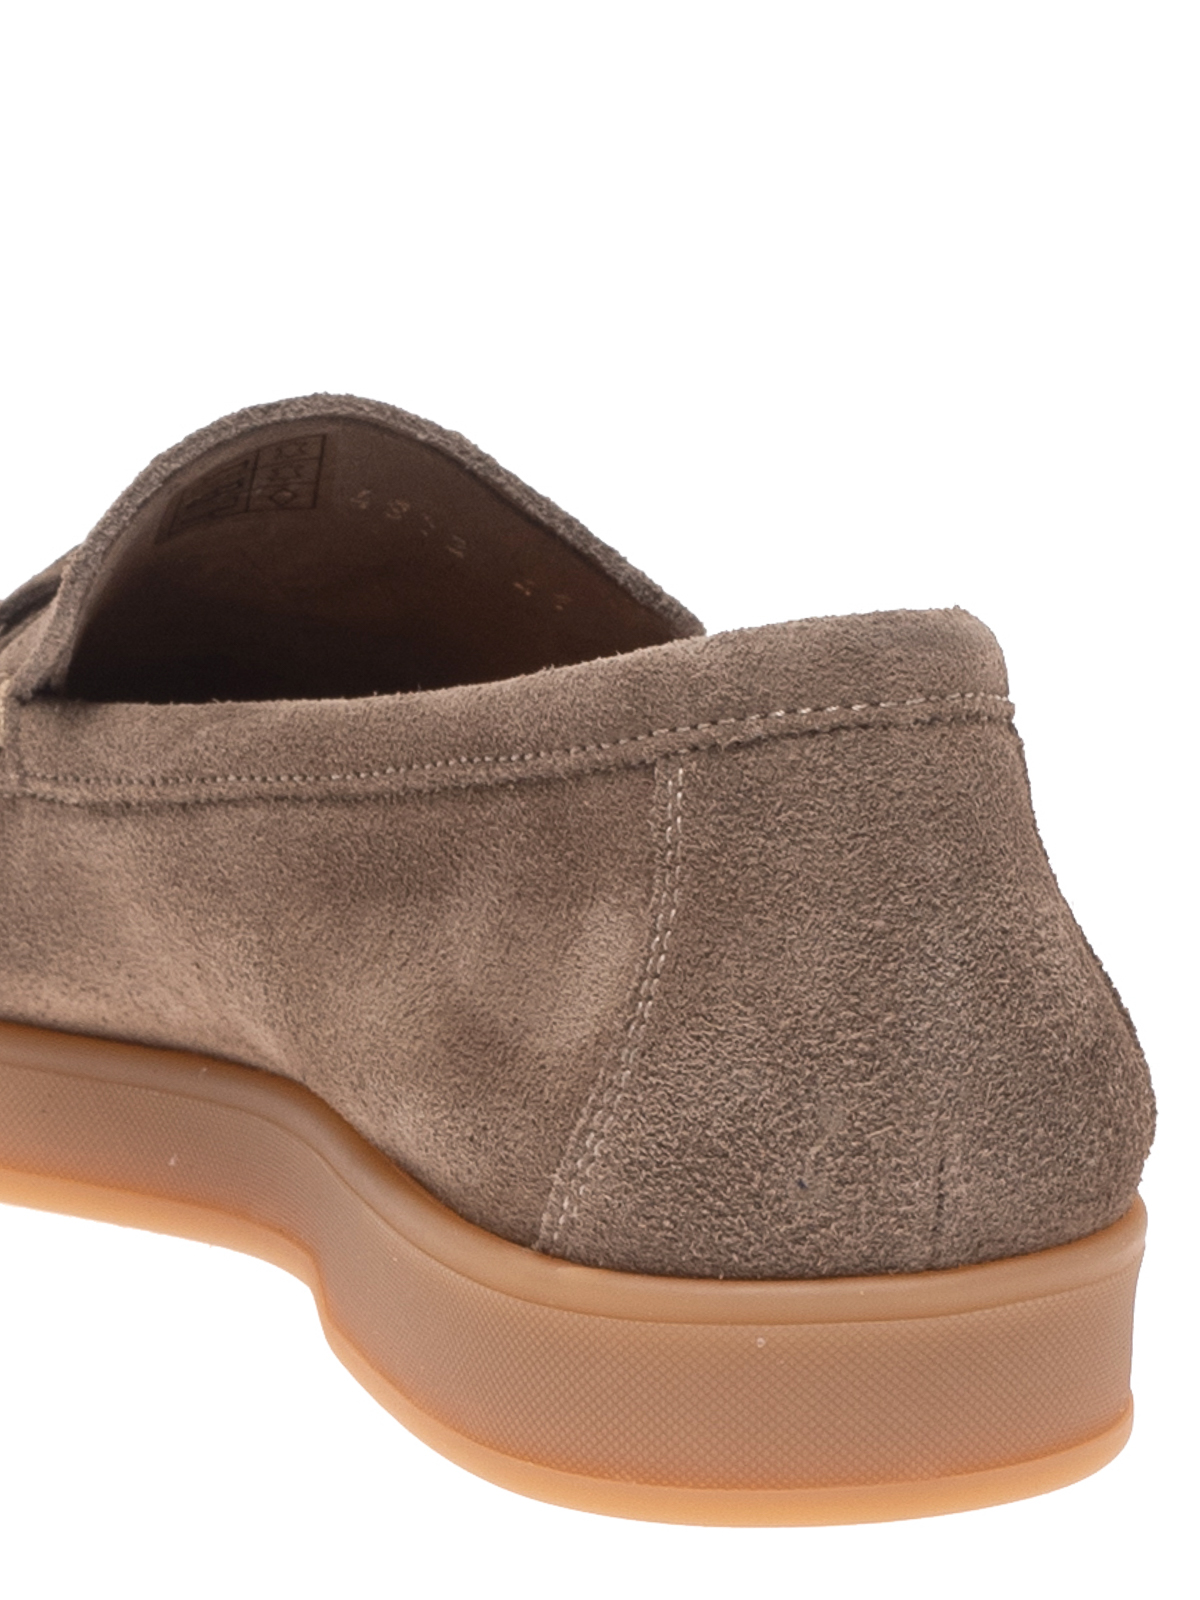 taupe suede loafers